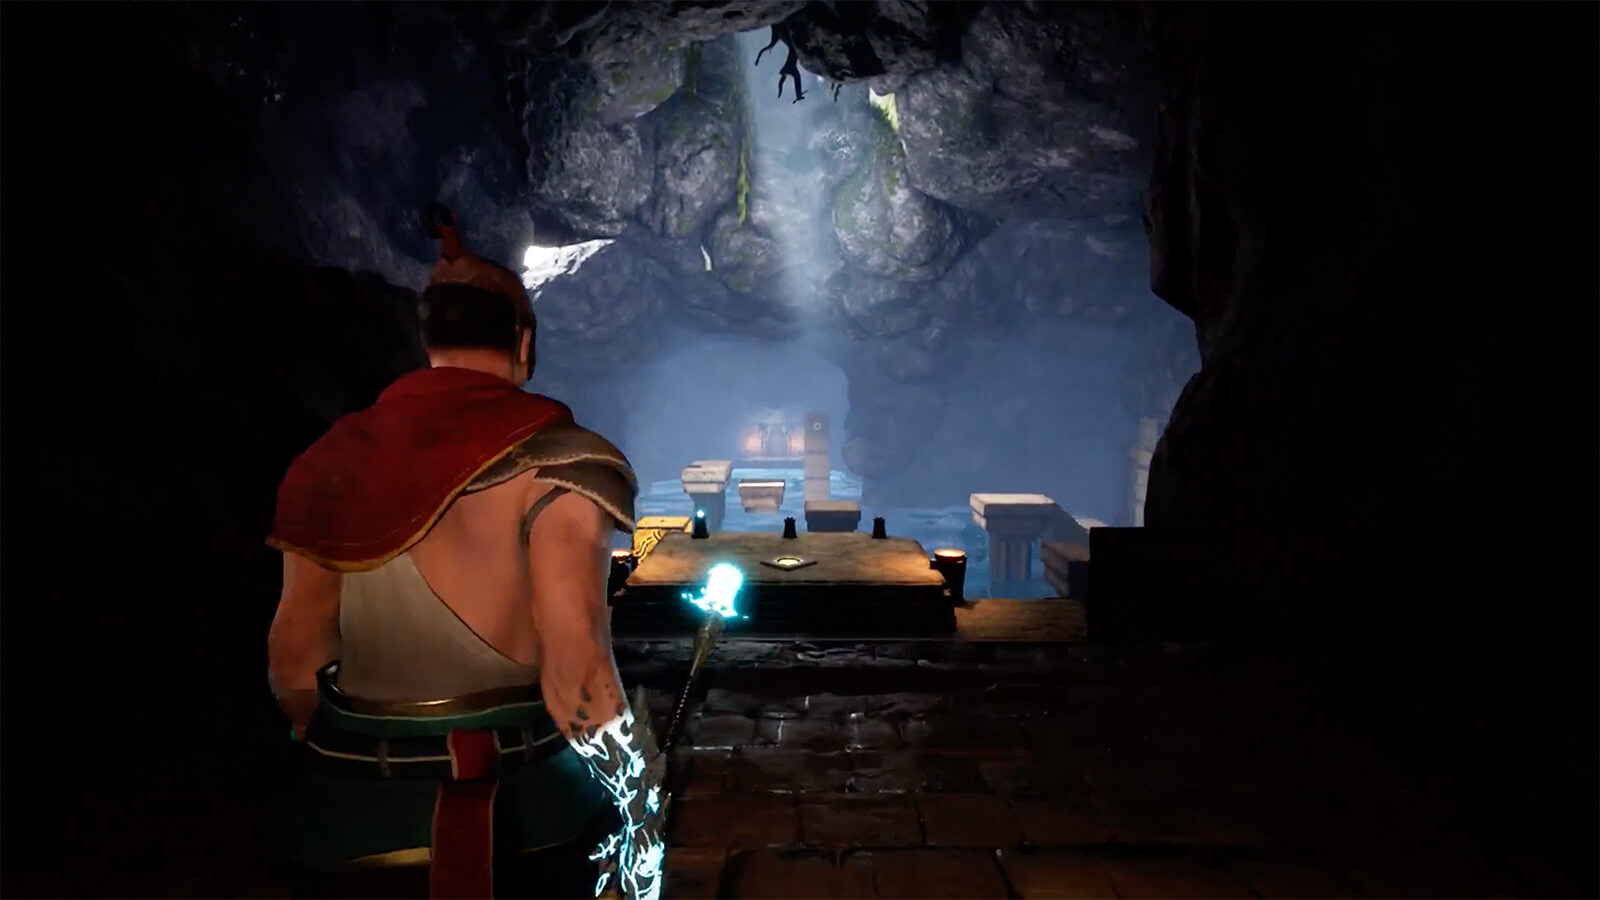 A man faces an opening in a cavern, holding a glowing spear.